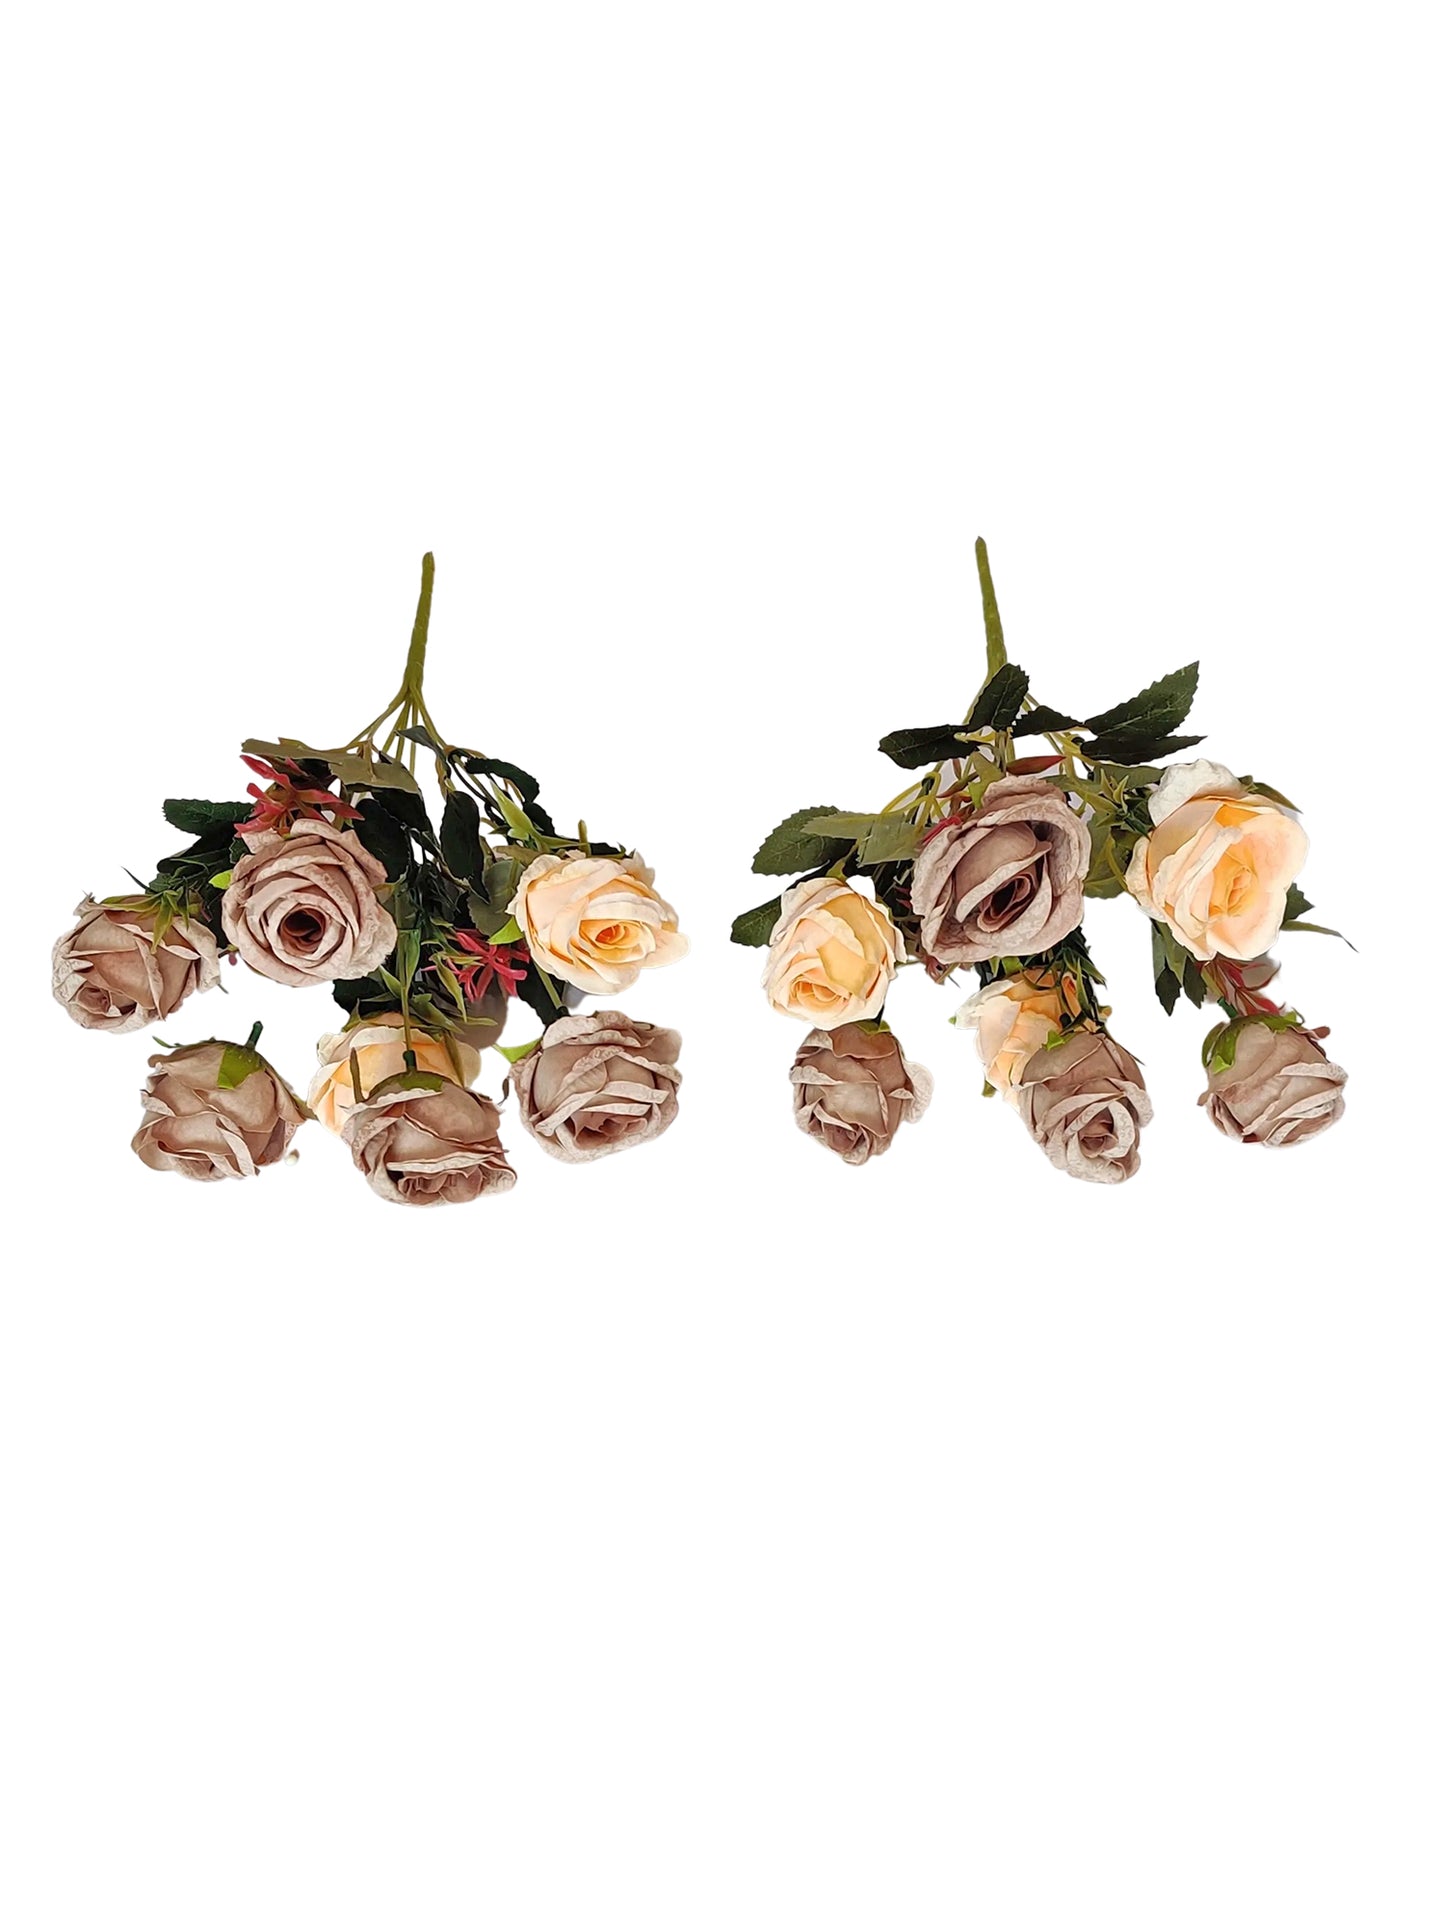 Golden Opulence: Lifelike Artificial Golden Rose - Eternal Gilded Beauty, Artificial rose flower bunches for vase, home decor, Combo Pack of 2 Pieces, Without Vase